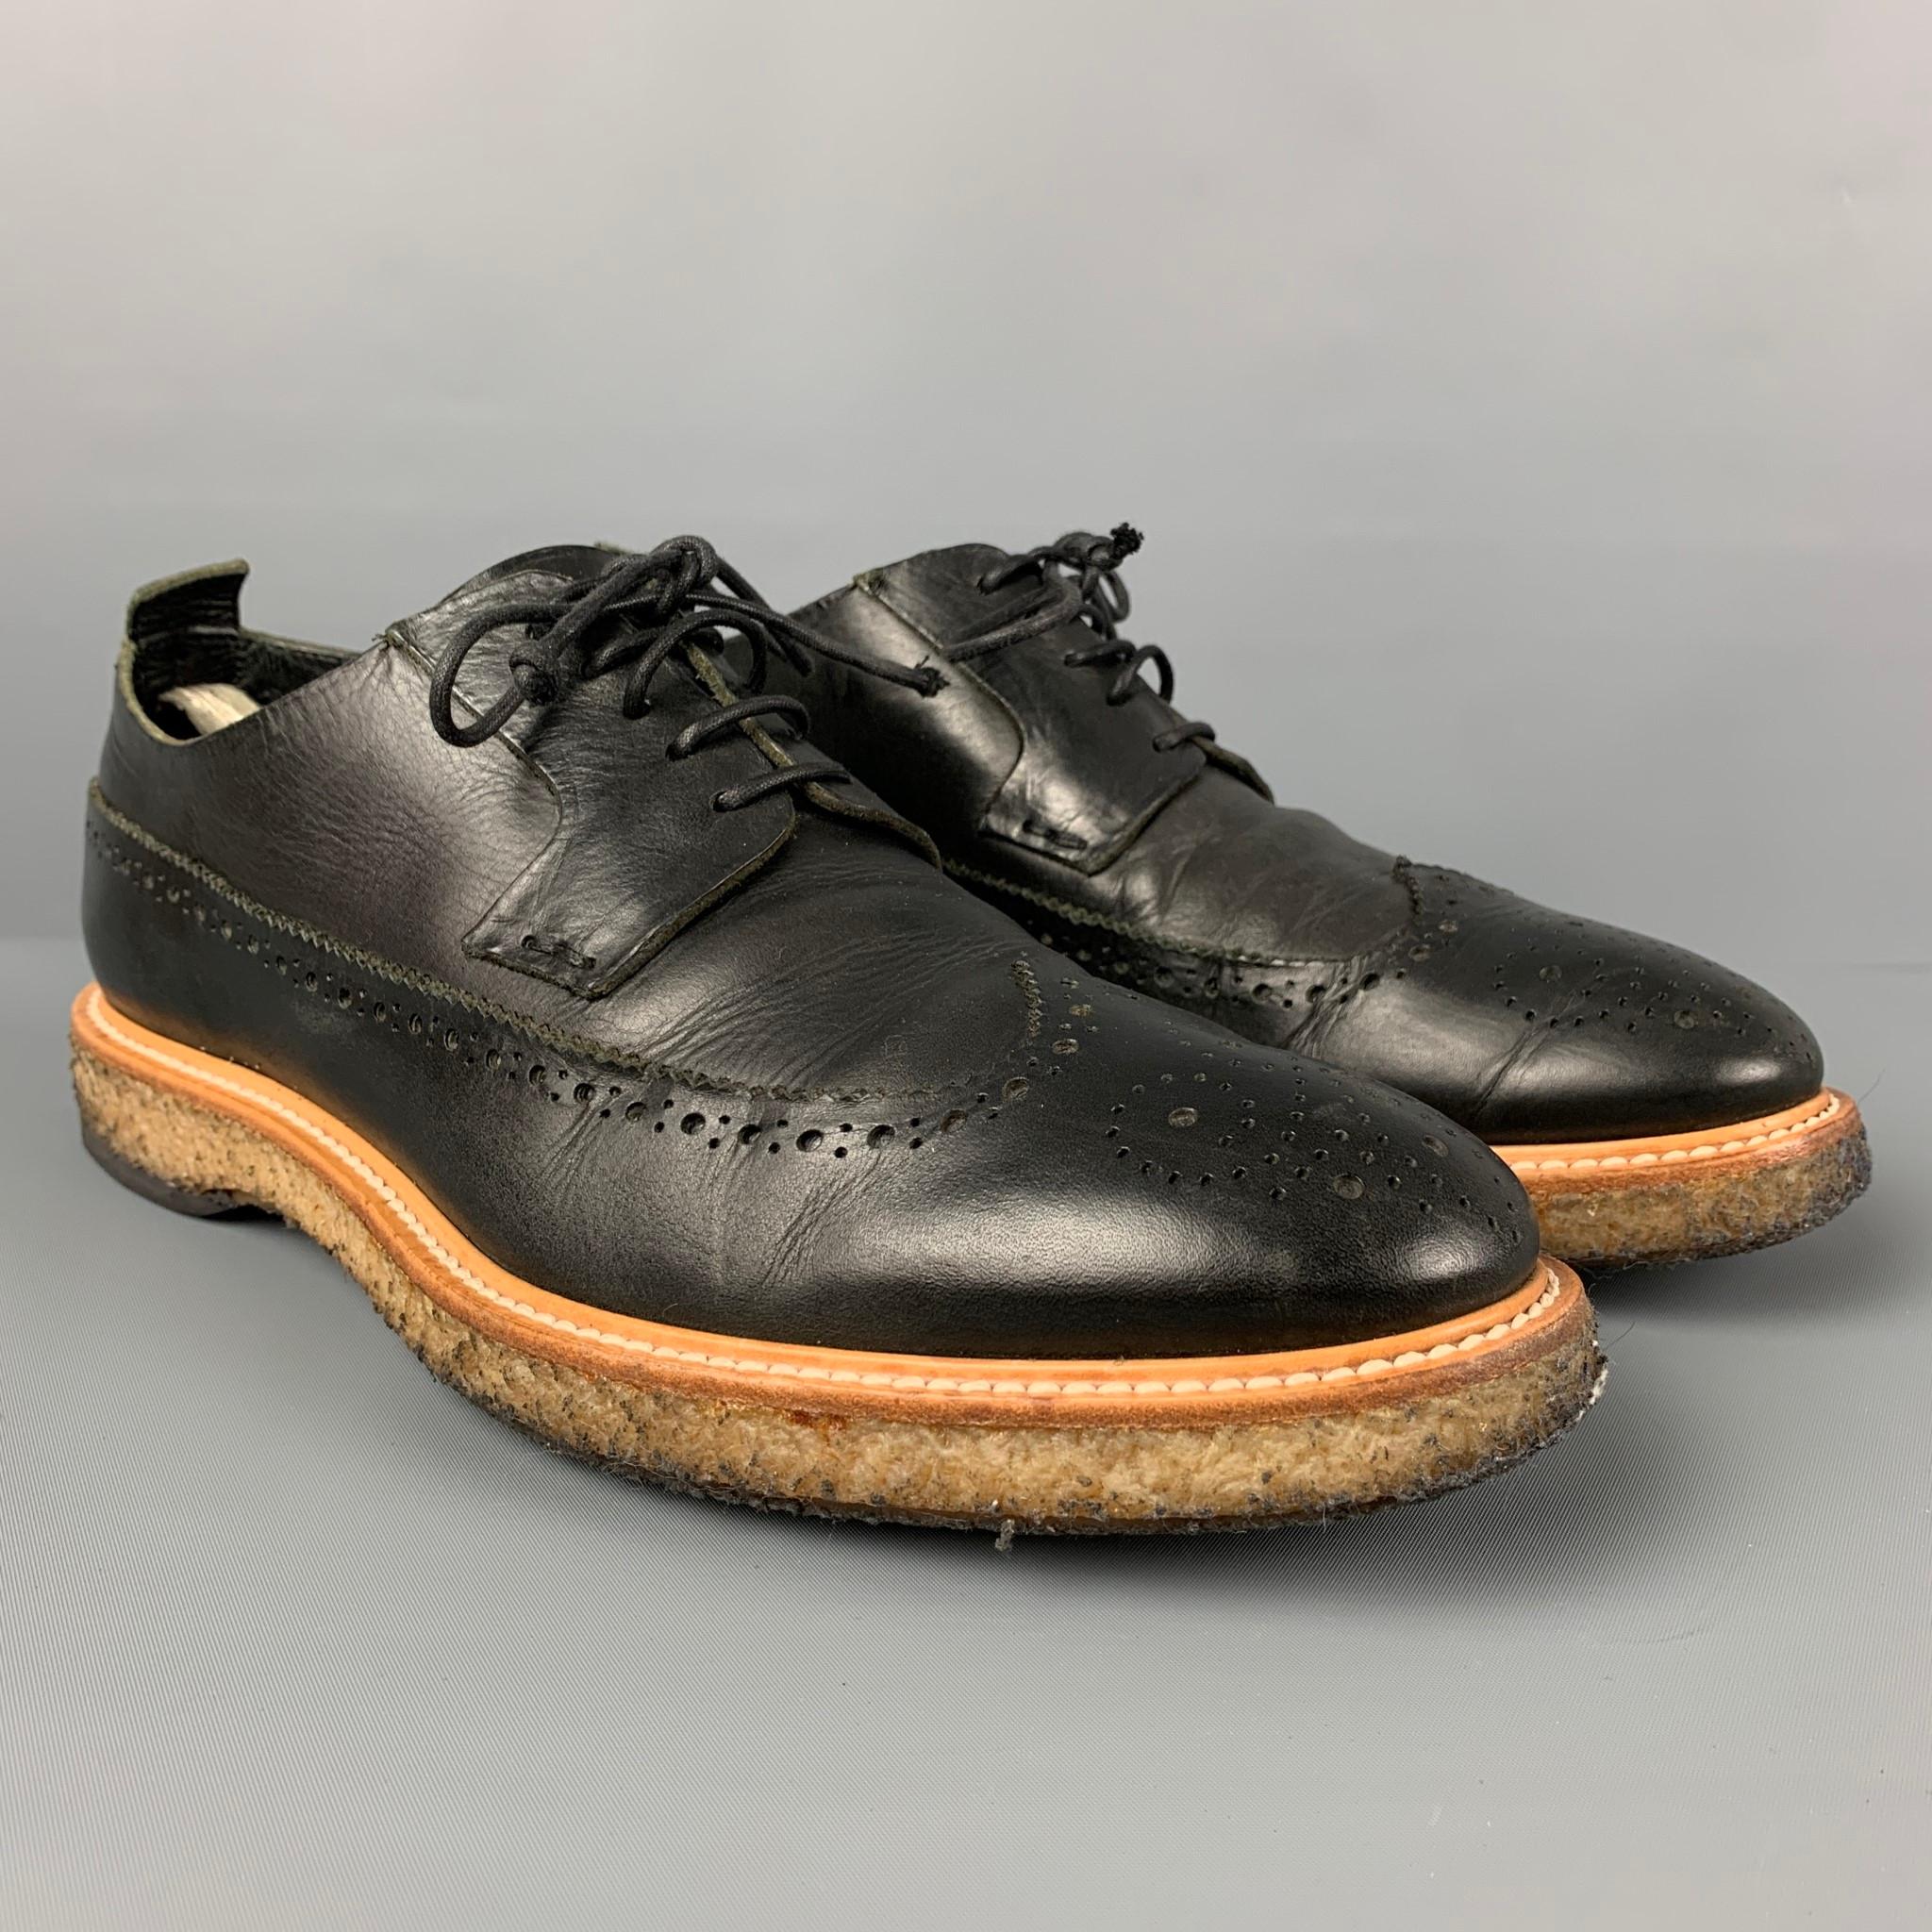 OFFICINE CREATIVE shoes comes in a black perforated leather featuring a wingtip style, crepe sole, and a lace up closure. Made in Italy. 

Very Good Pre-Owned Condition.
Marked: 44

Outsole: 13 in. x 4.5 in. 